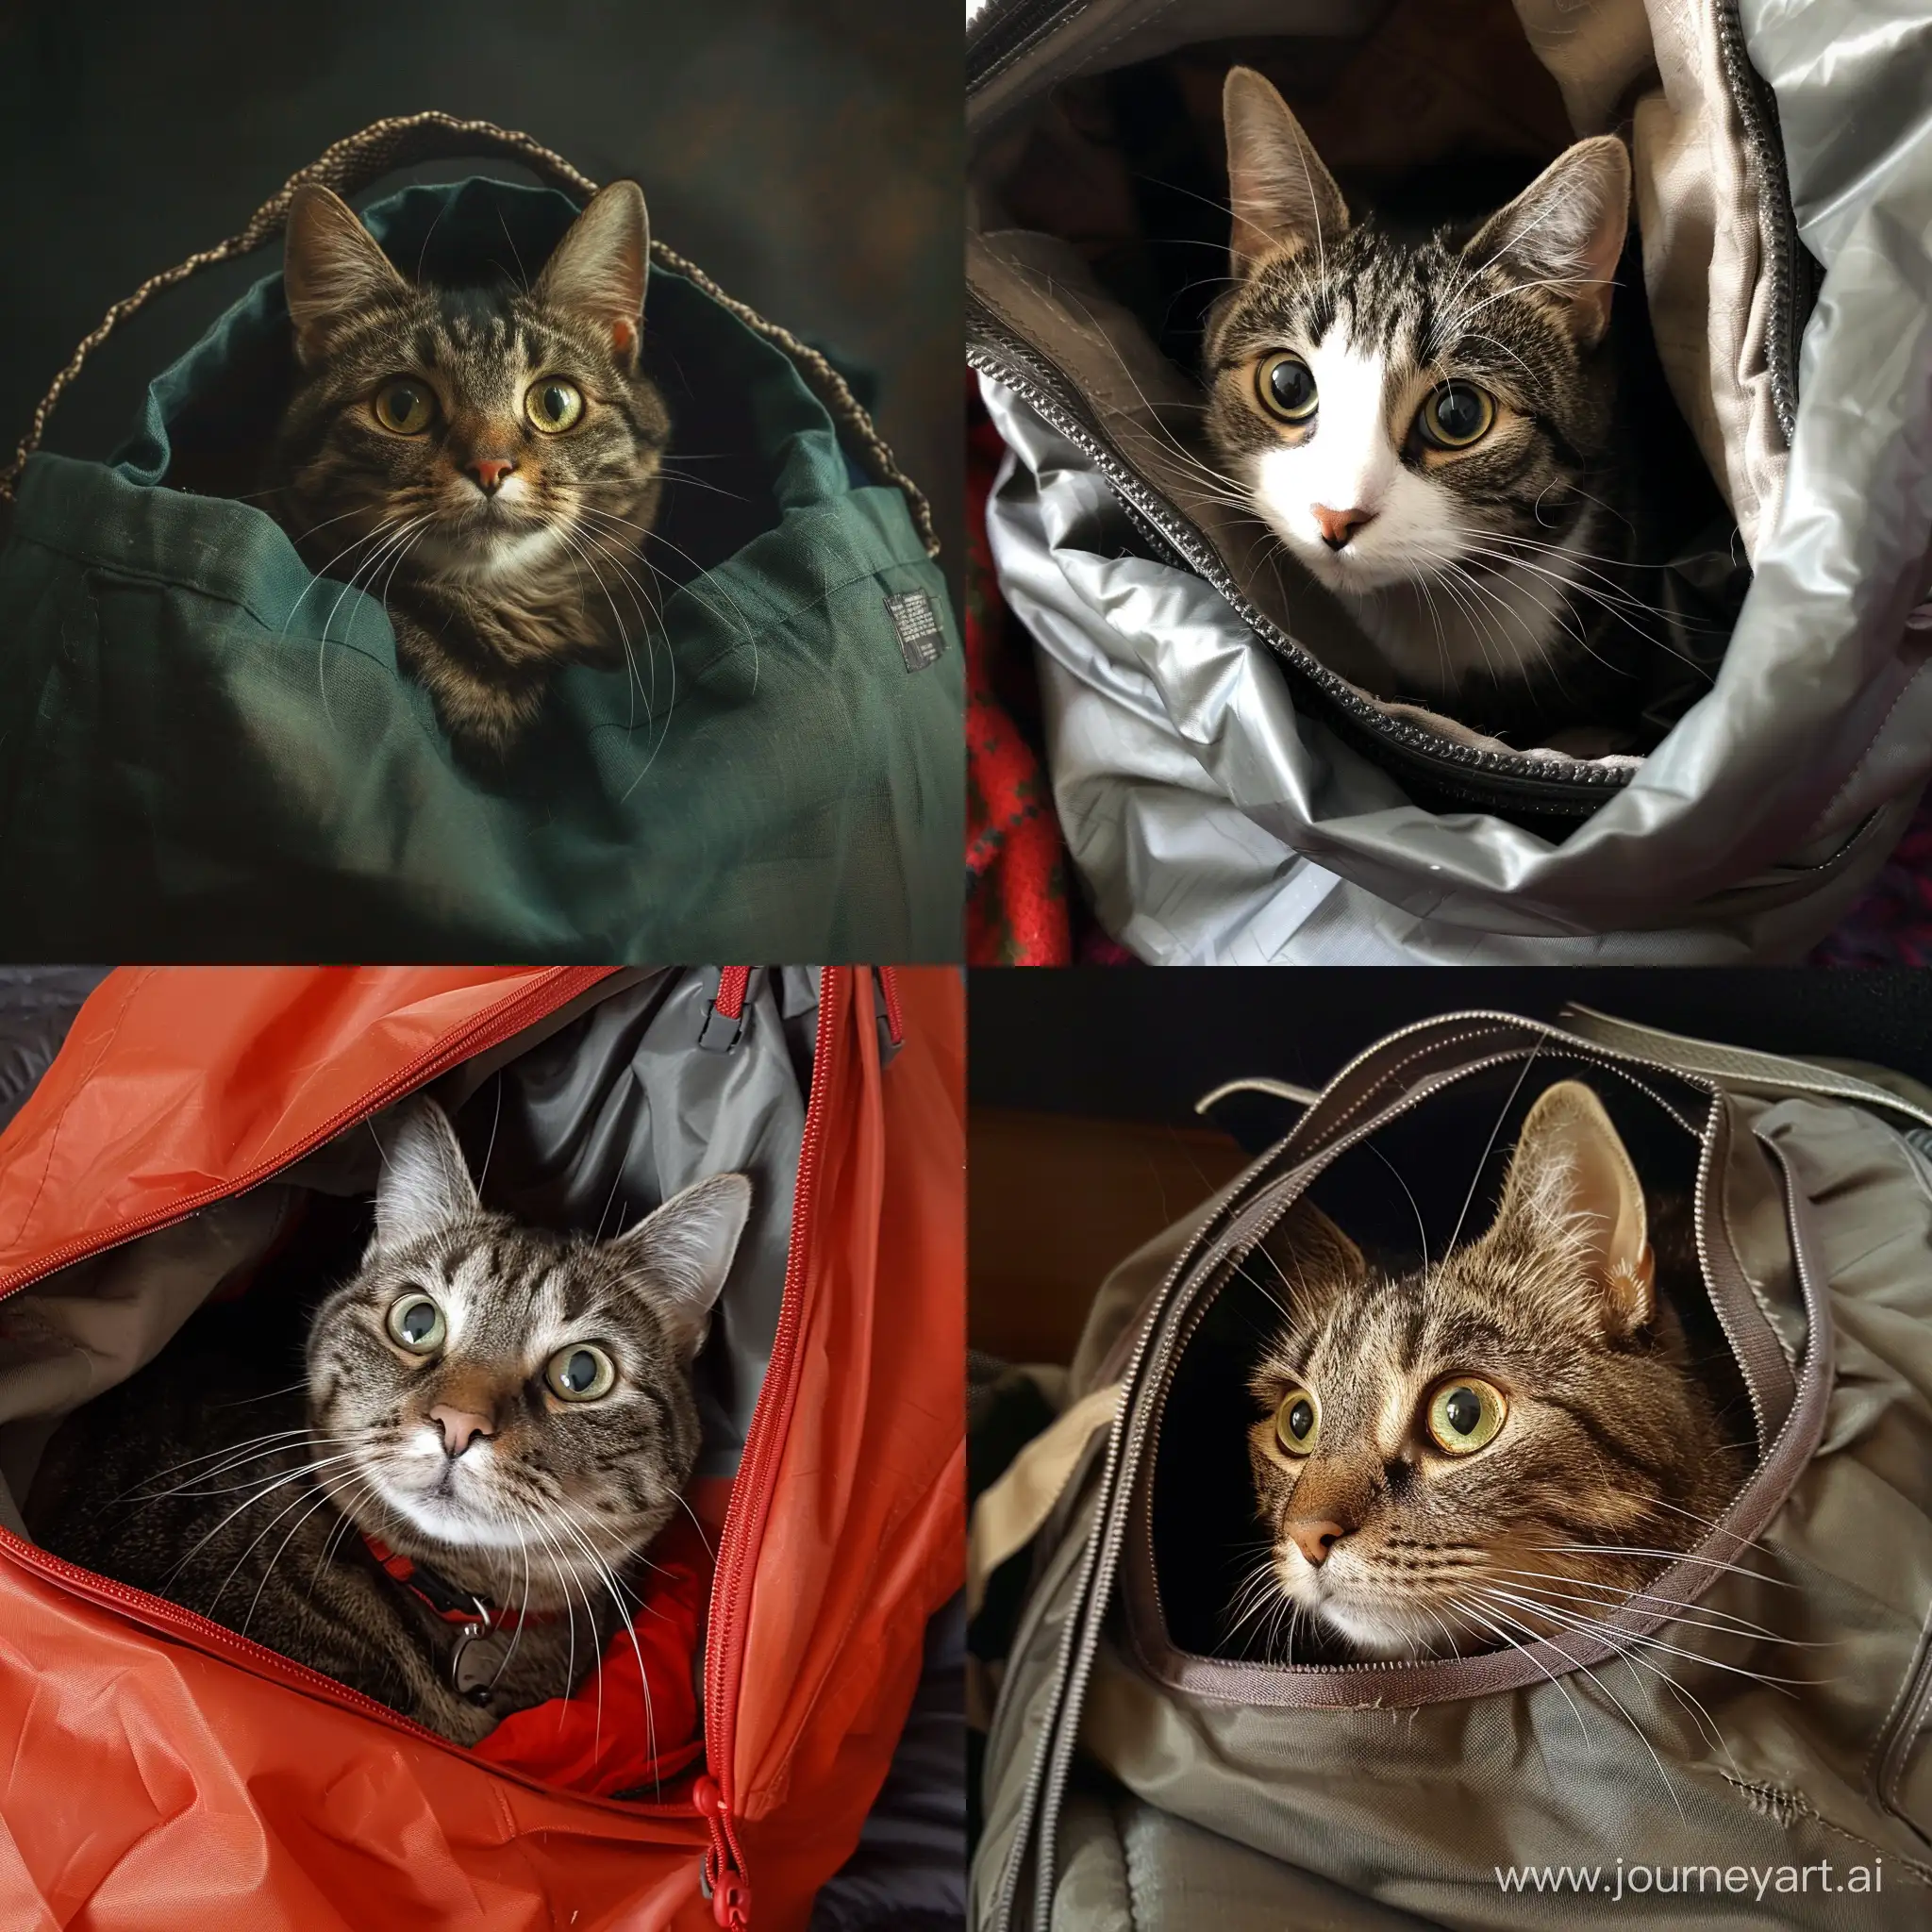 Playful-Cat-Popping-Out-of-a-Colorful-Bag